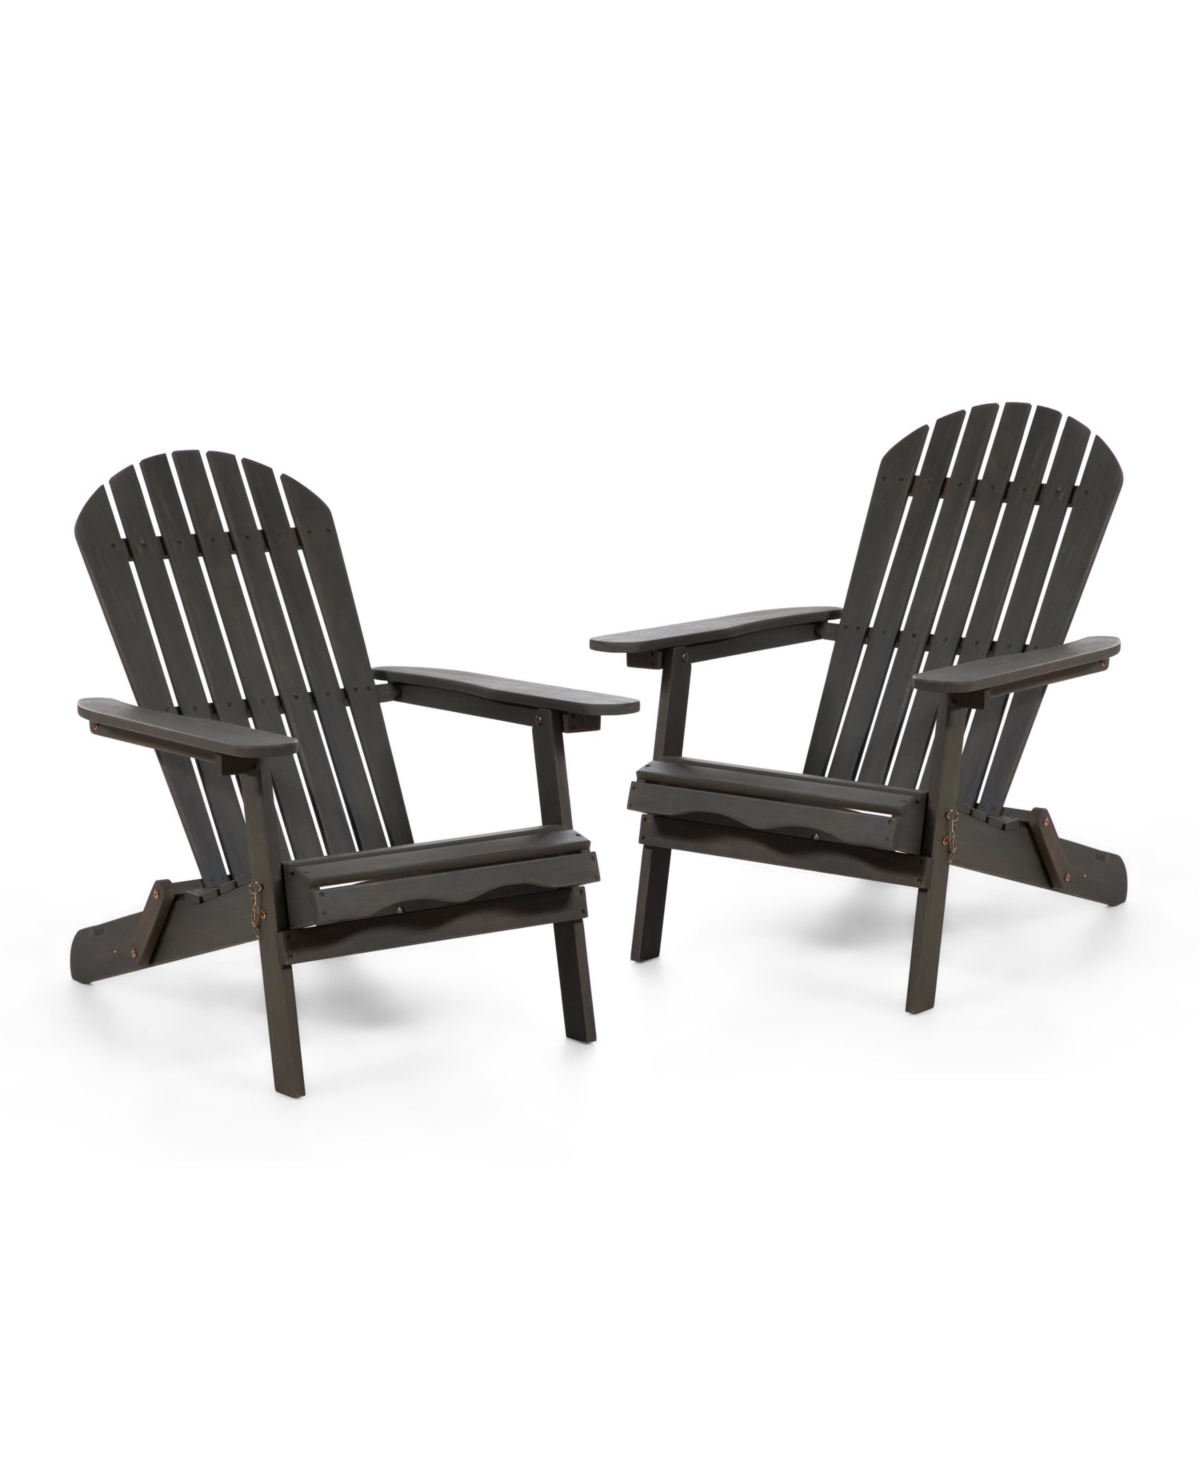 Furniture Of America 2 Piece Outdoor Eucalyptus Wood Folding Adirondrack Chairs In Washed Gray